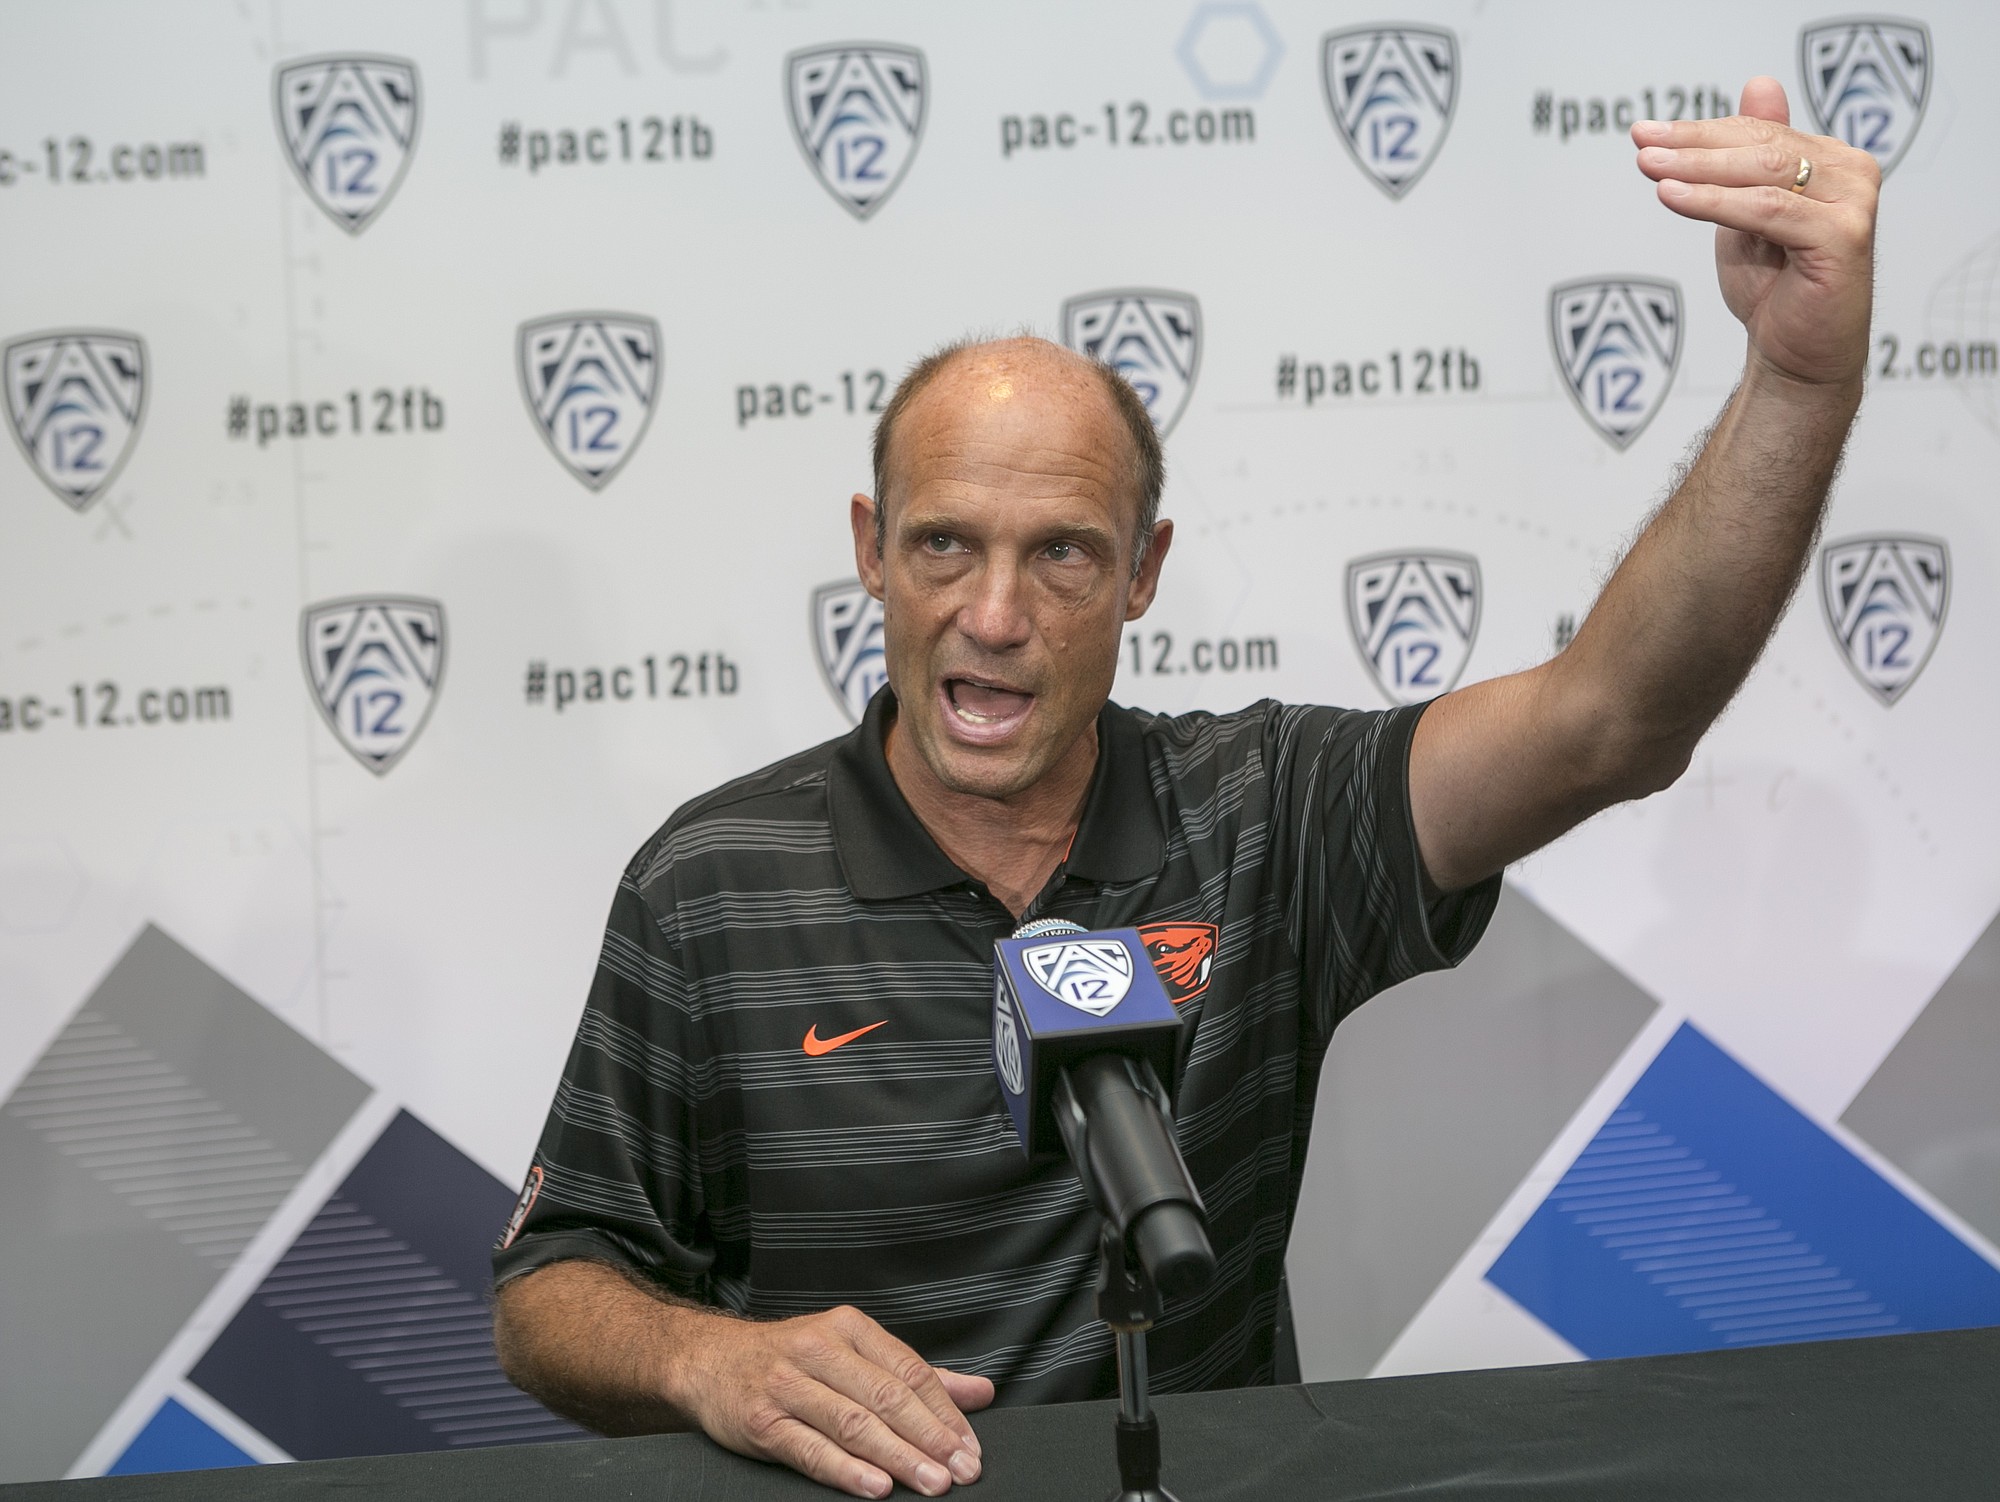 Oregon State head coach Mike Riley takes questions at the 2014 Pac-12 NCAA college football media days at Paramount Studios in Los Angeles Thursday, July 24, 2014.